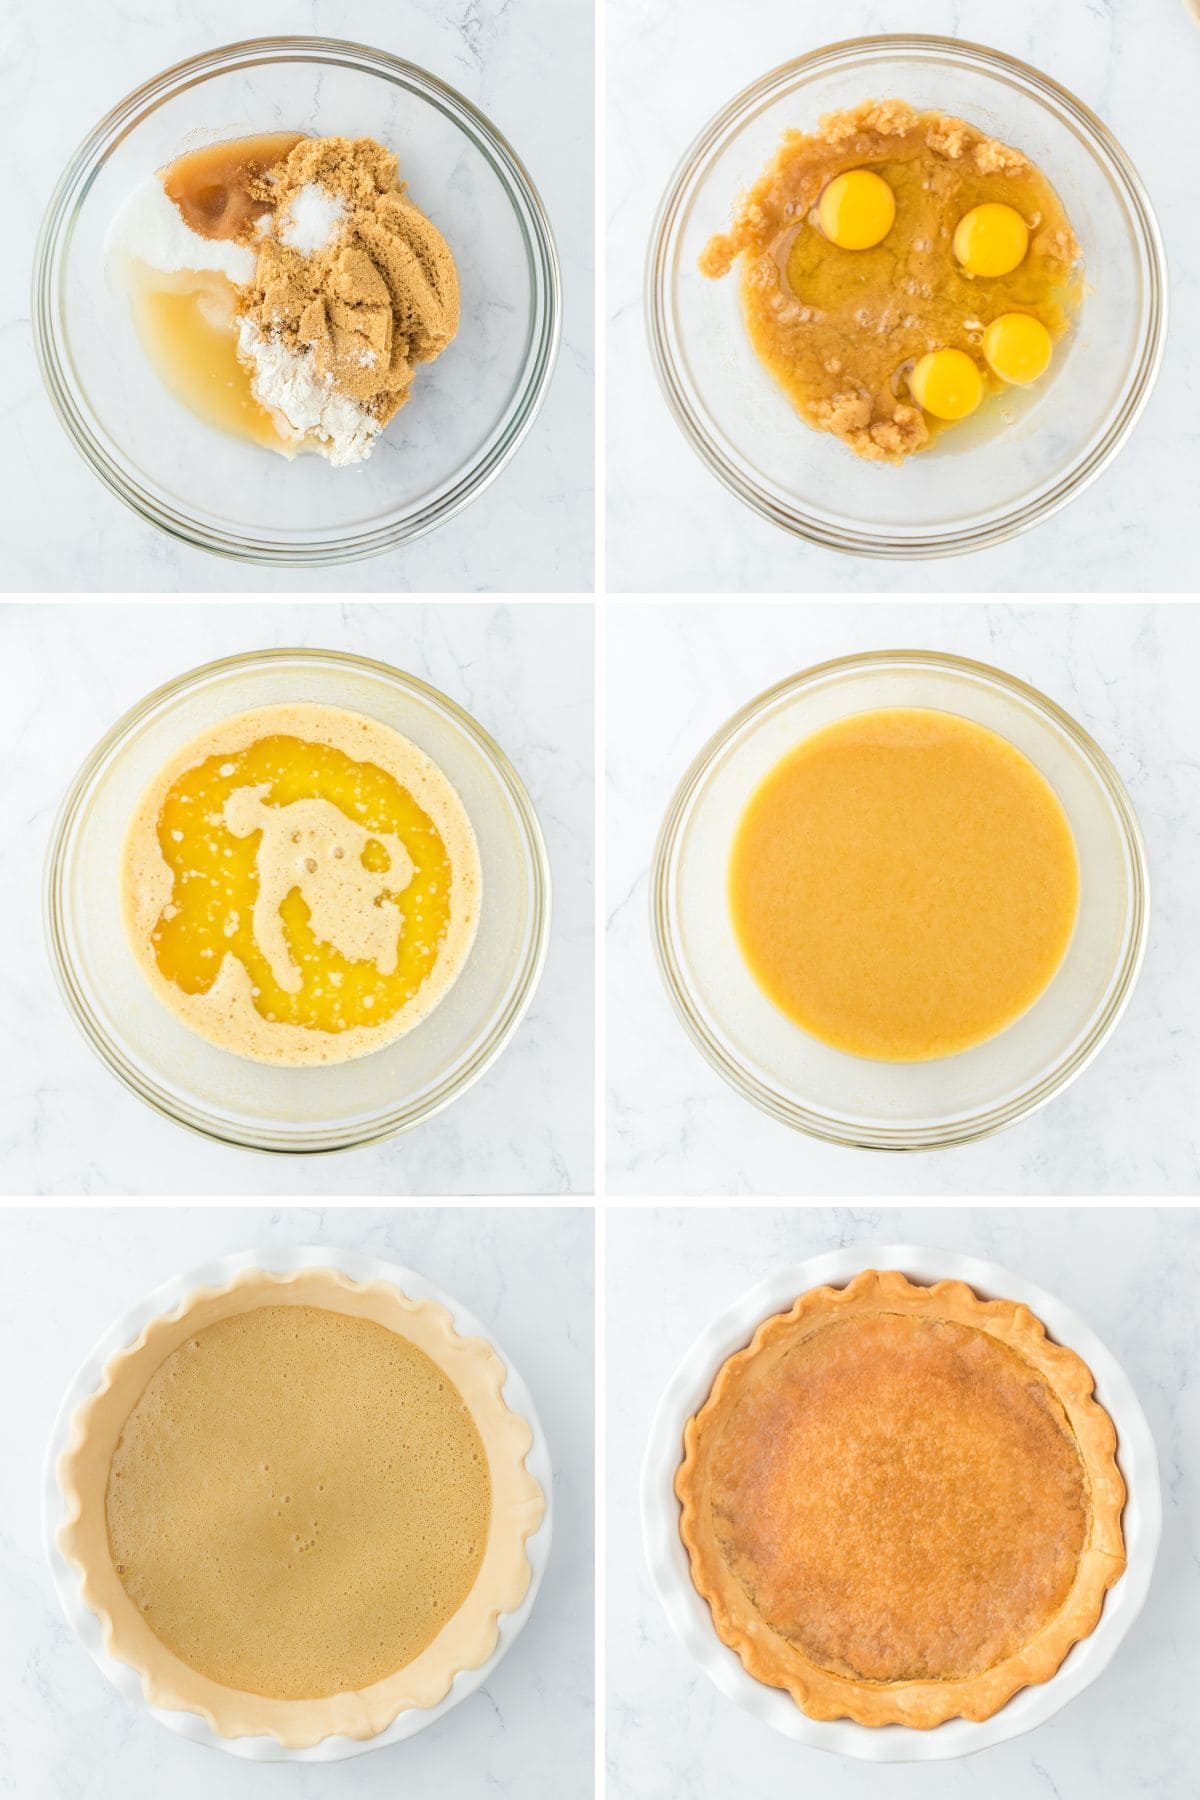 Collage of steps to make vinegar pie including mixing the pie filling, pouring it into the pie crust, and pie after baking